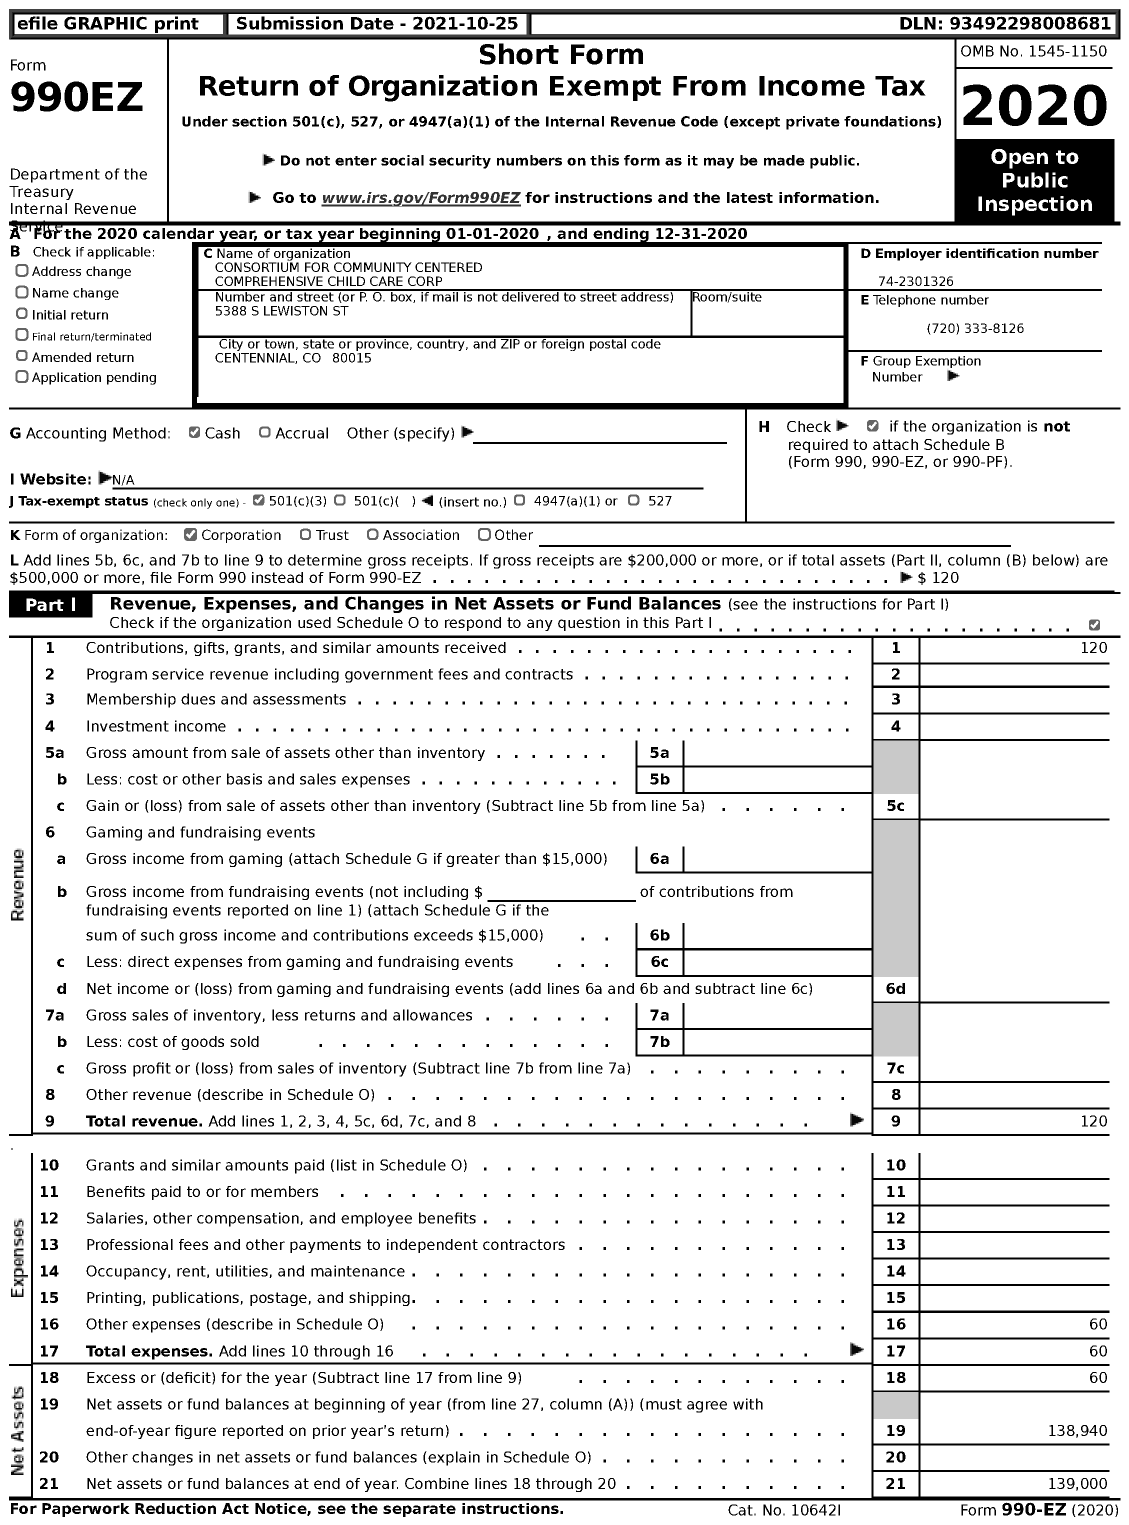 Image of first page of 2020 Form 990EZ for Consortium for Community Centered Comprehensive Child Care Corporation